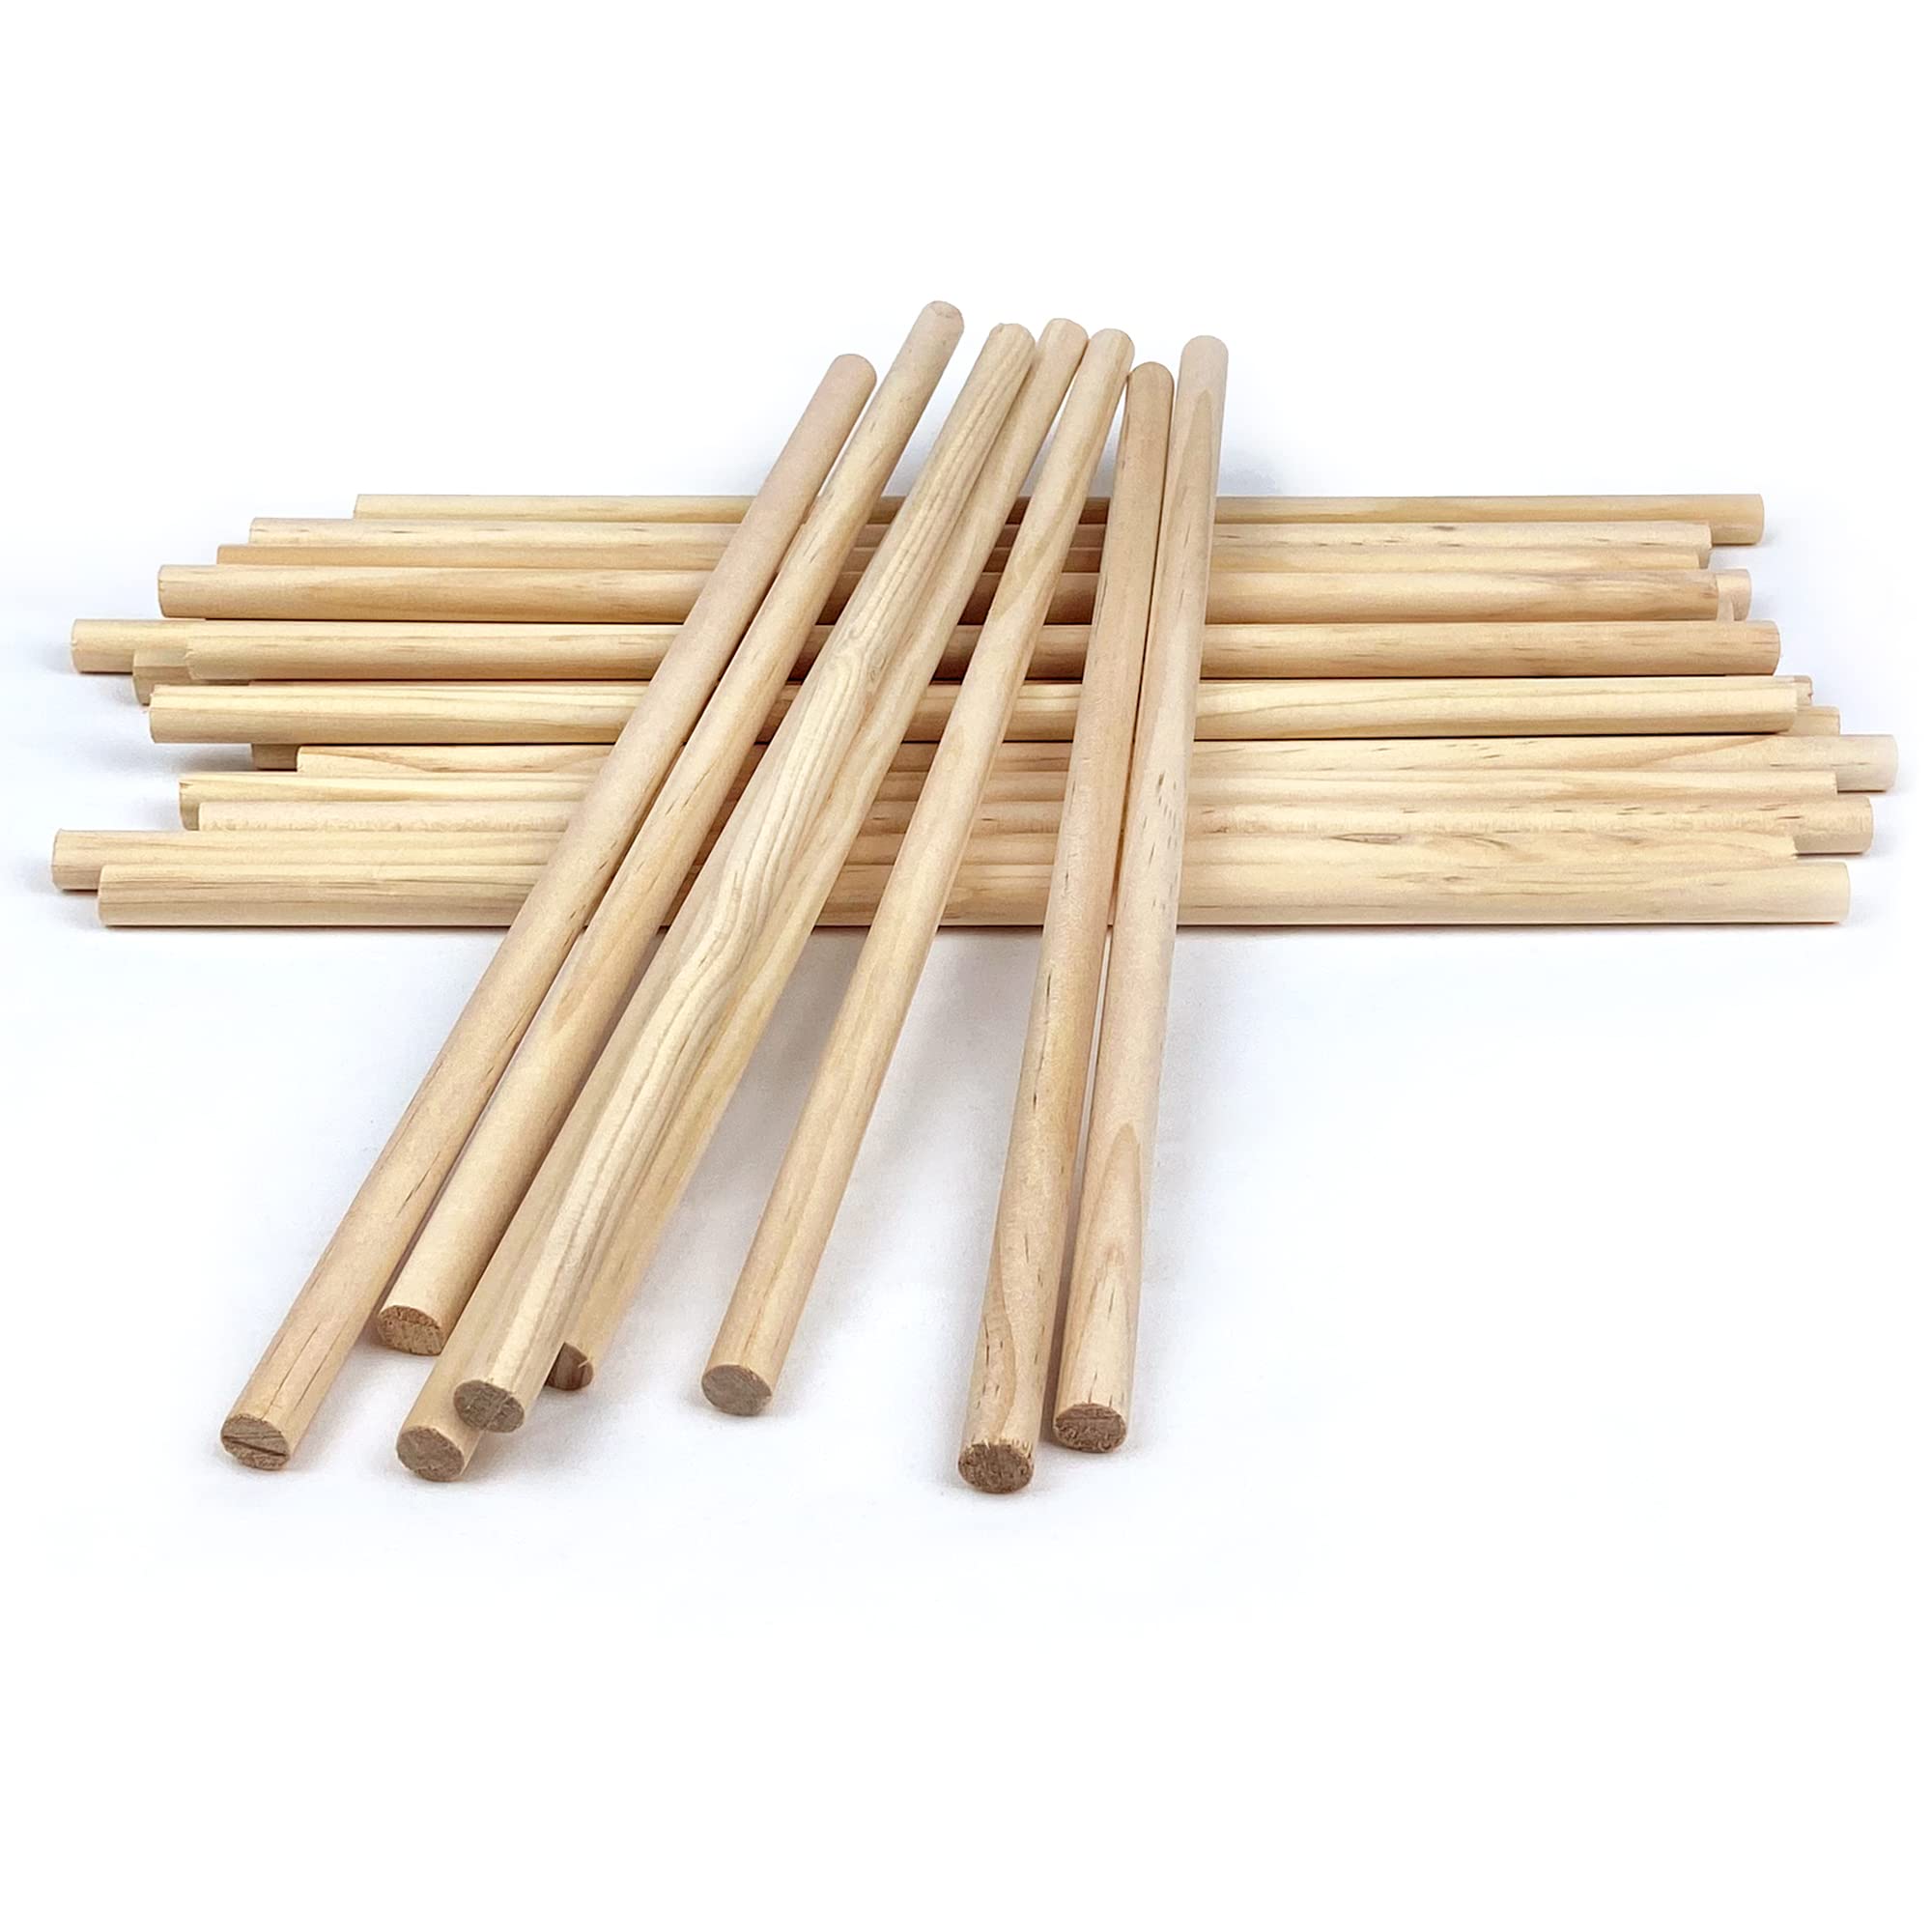 3/8 x 12 Inch Wooden Dowel Rods 25 PCS Unfinished Round Sticks for